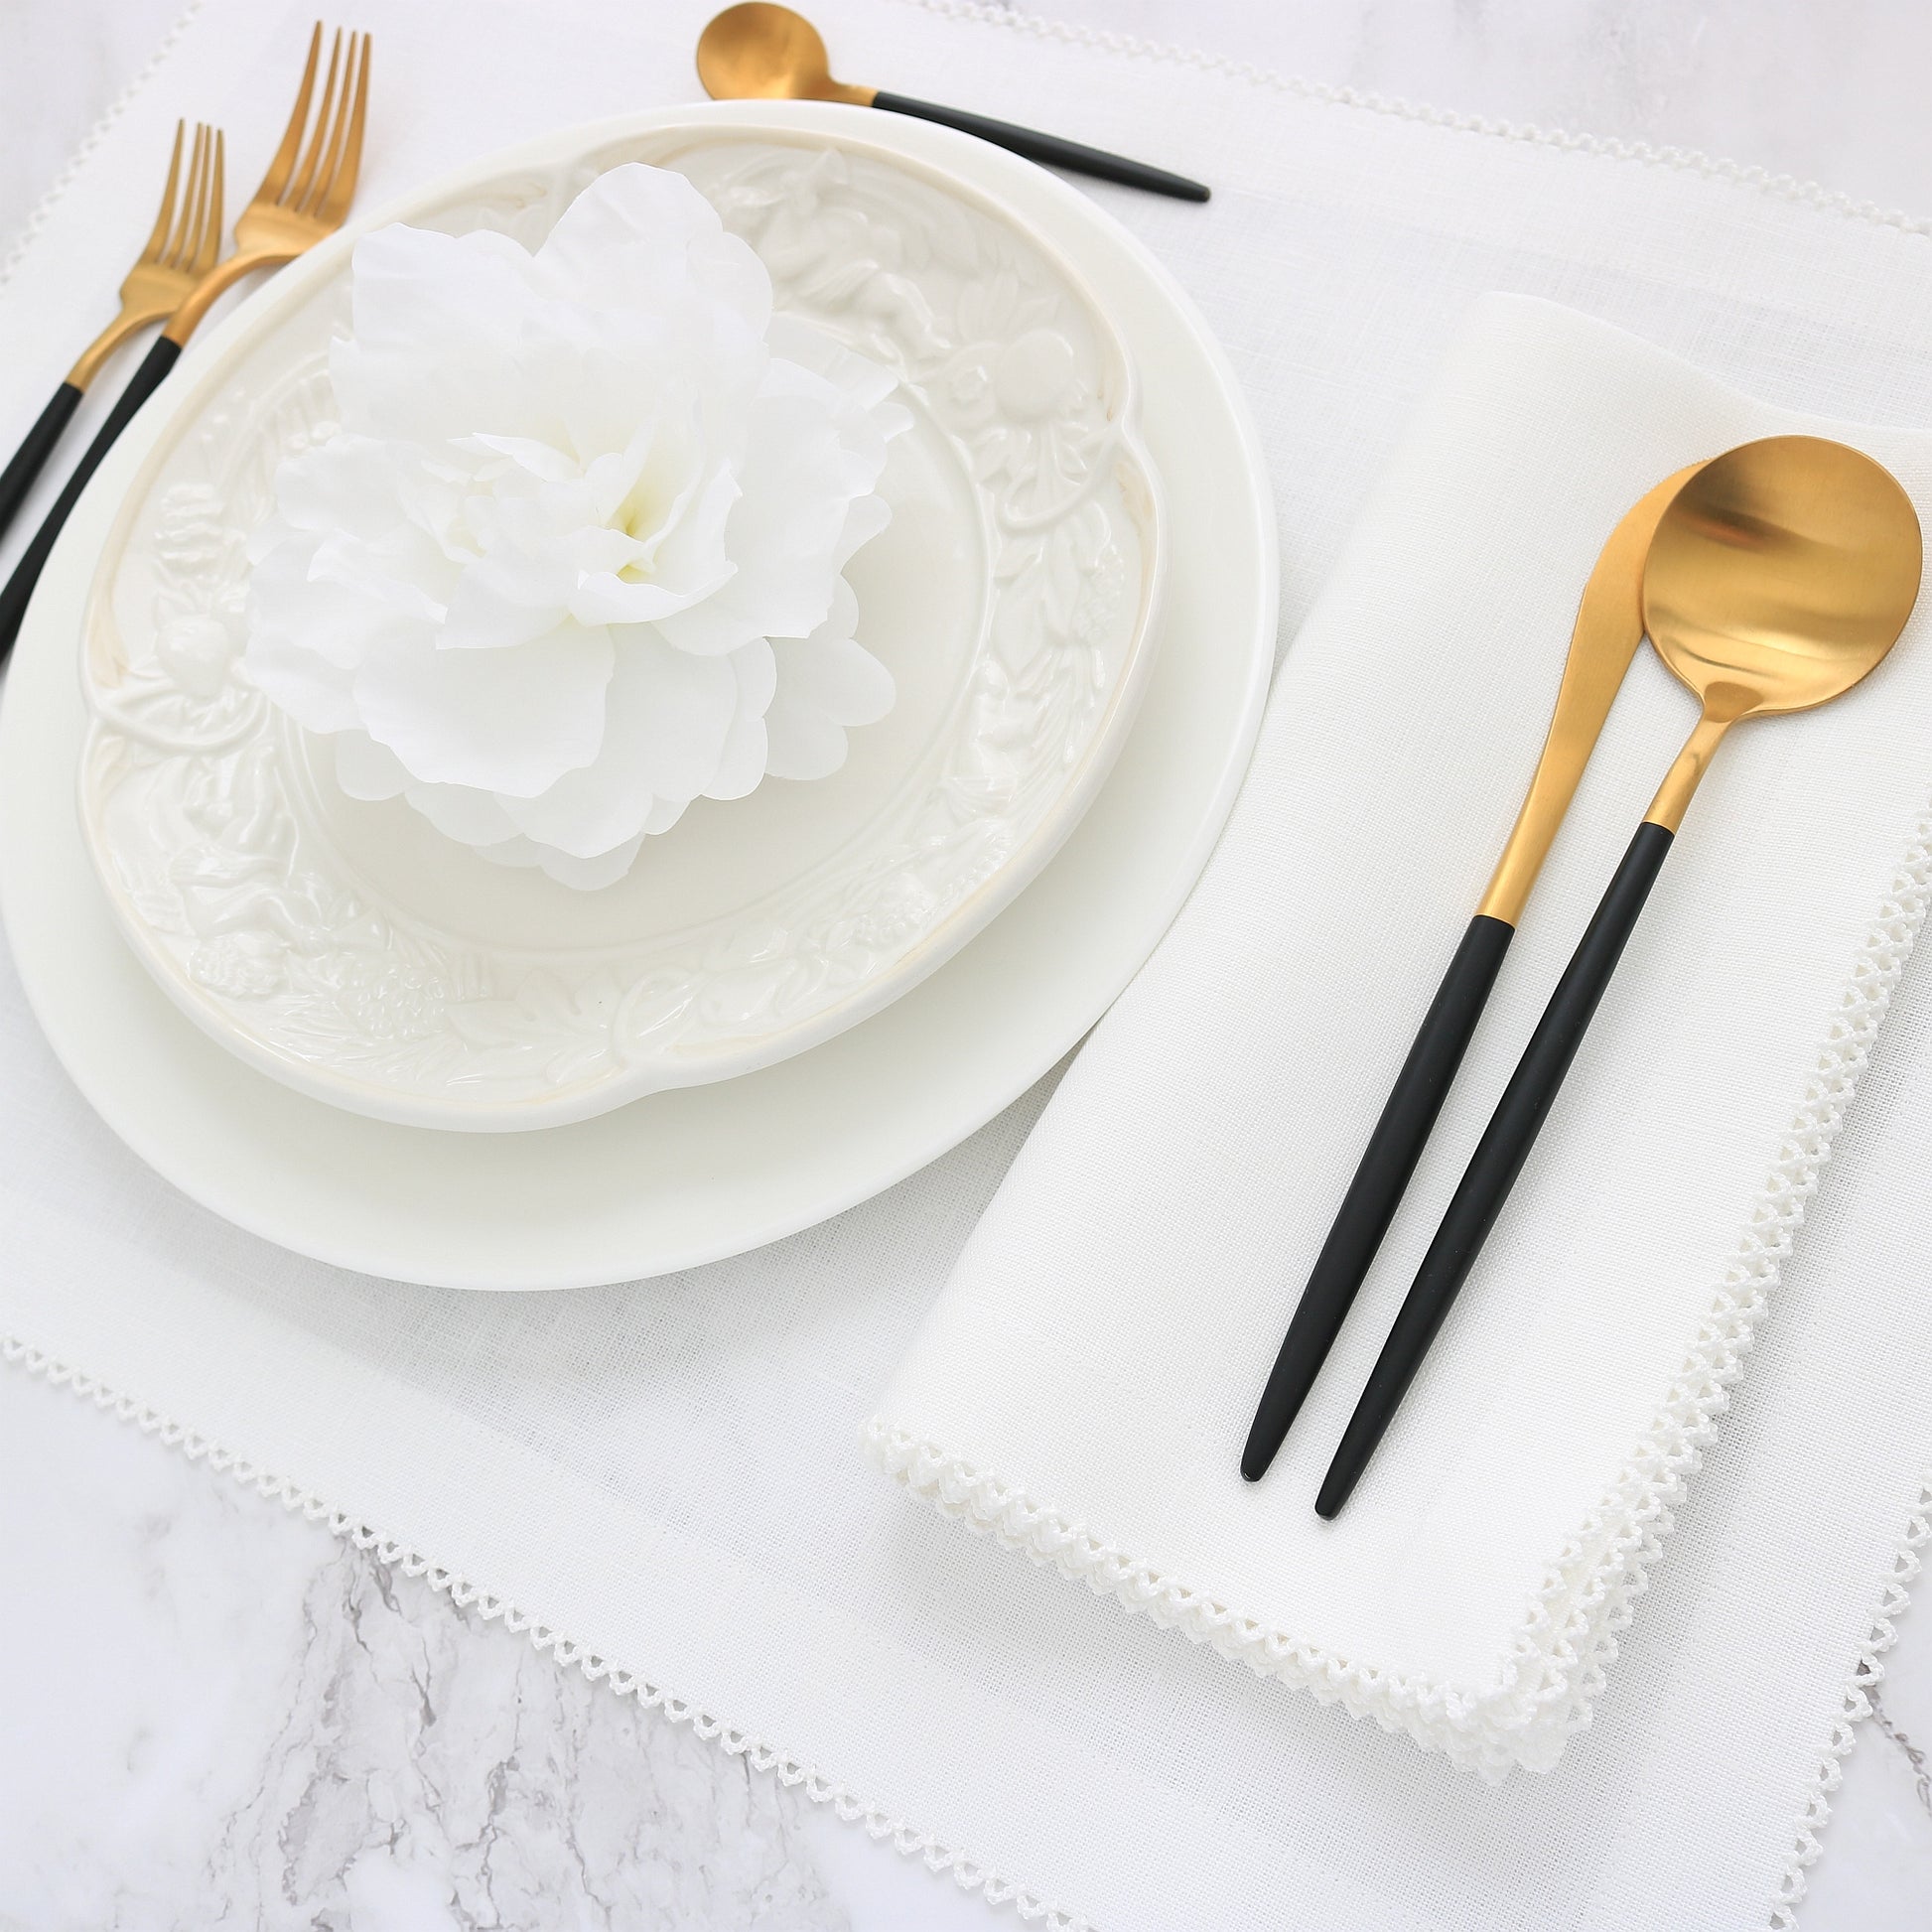 white placemat with white picot trim and matching dinner napkin